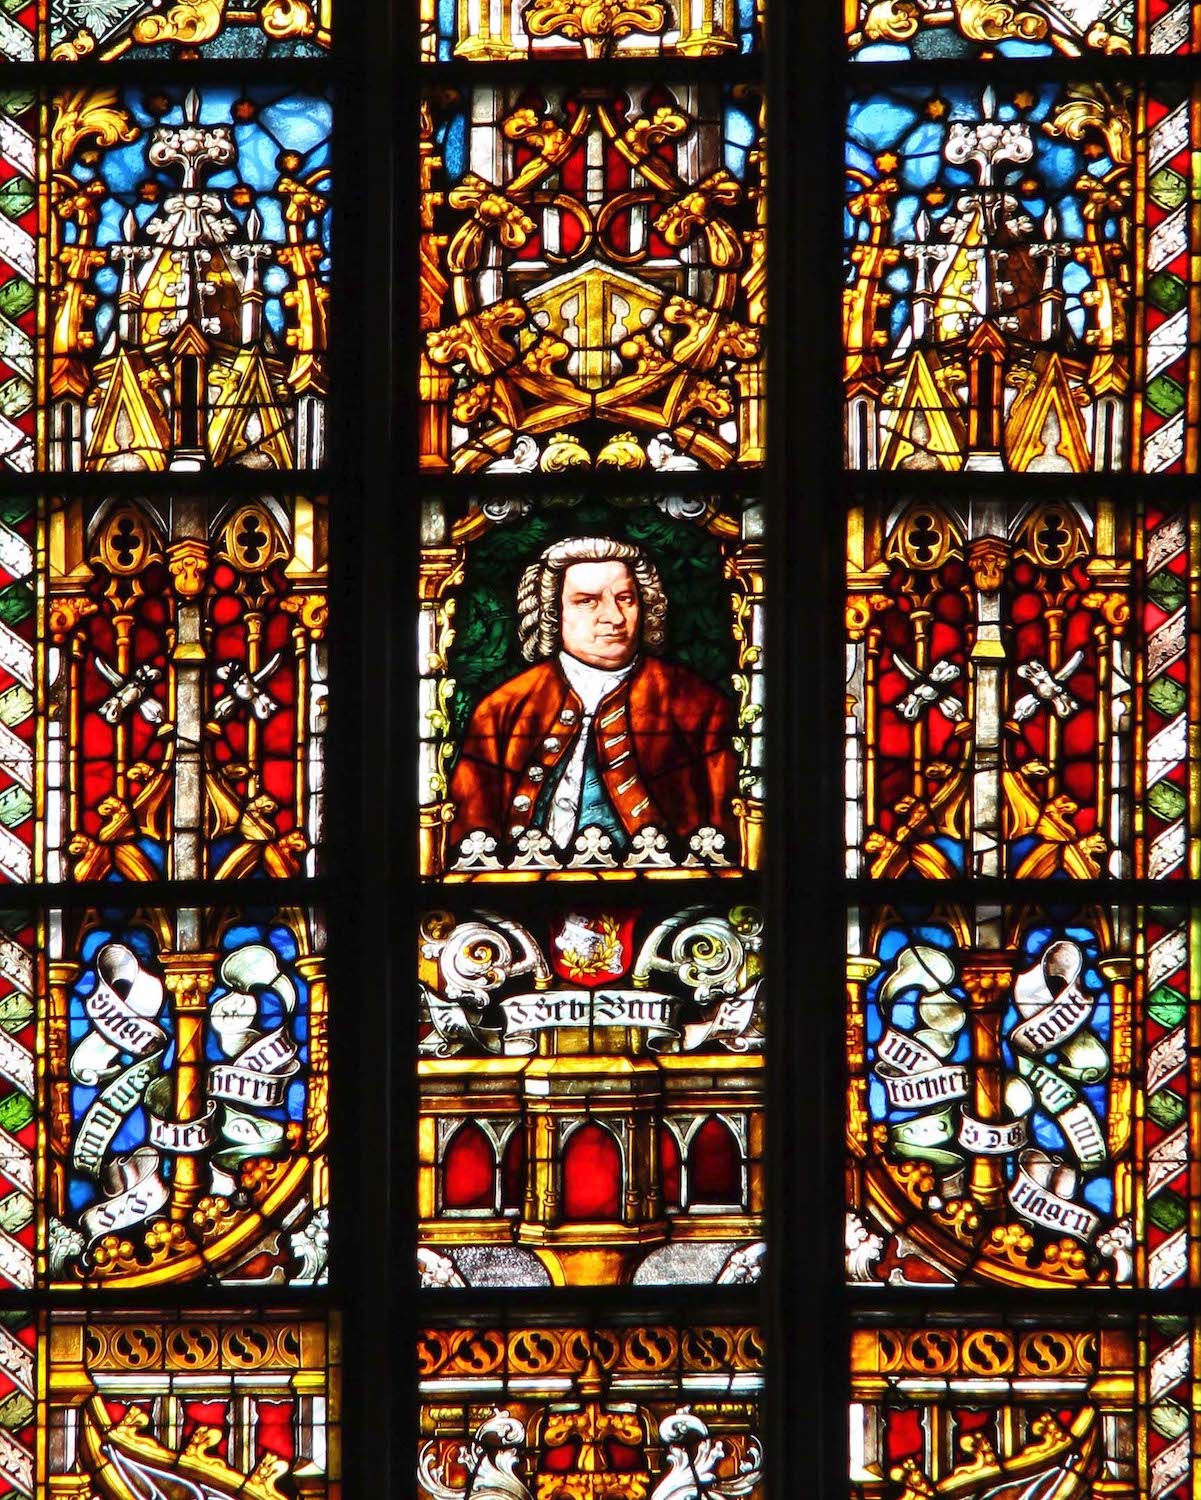 The Bach glass window in the Thomaskirche in Leipzig.